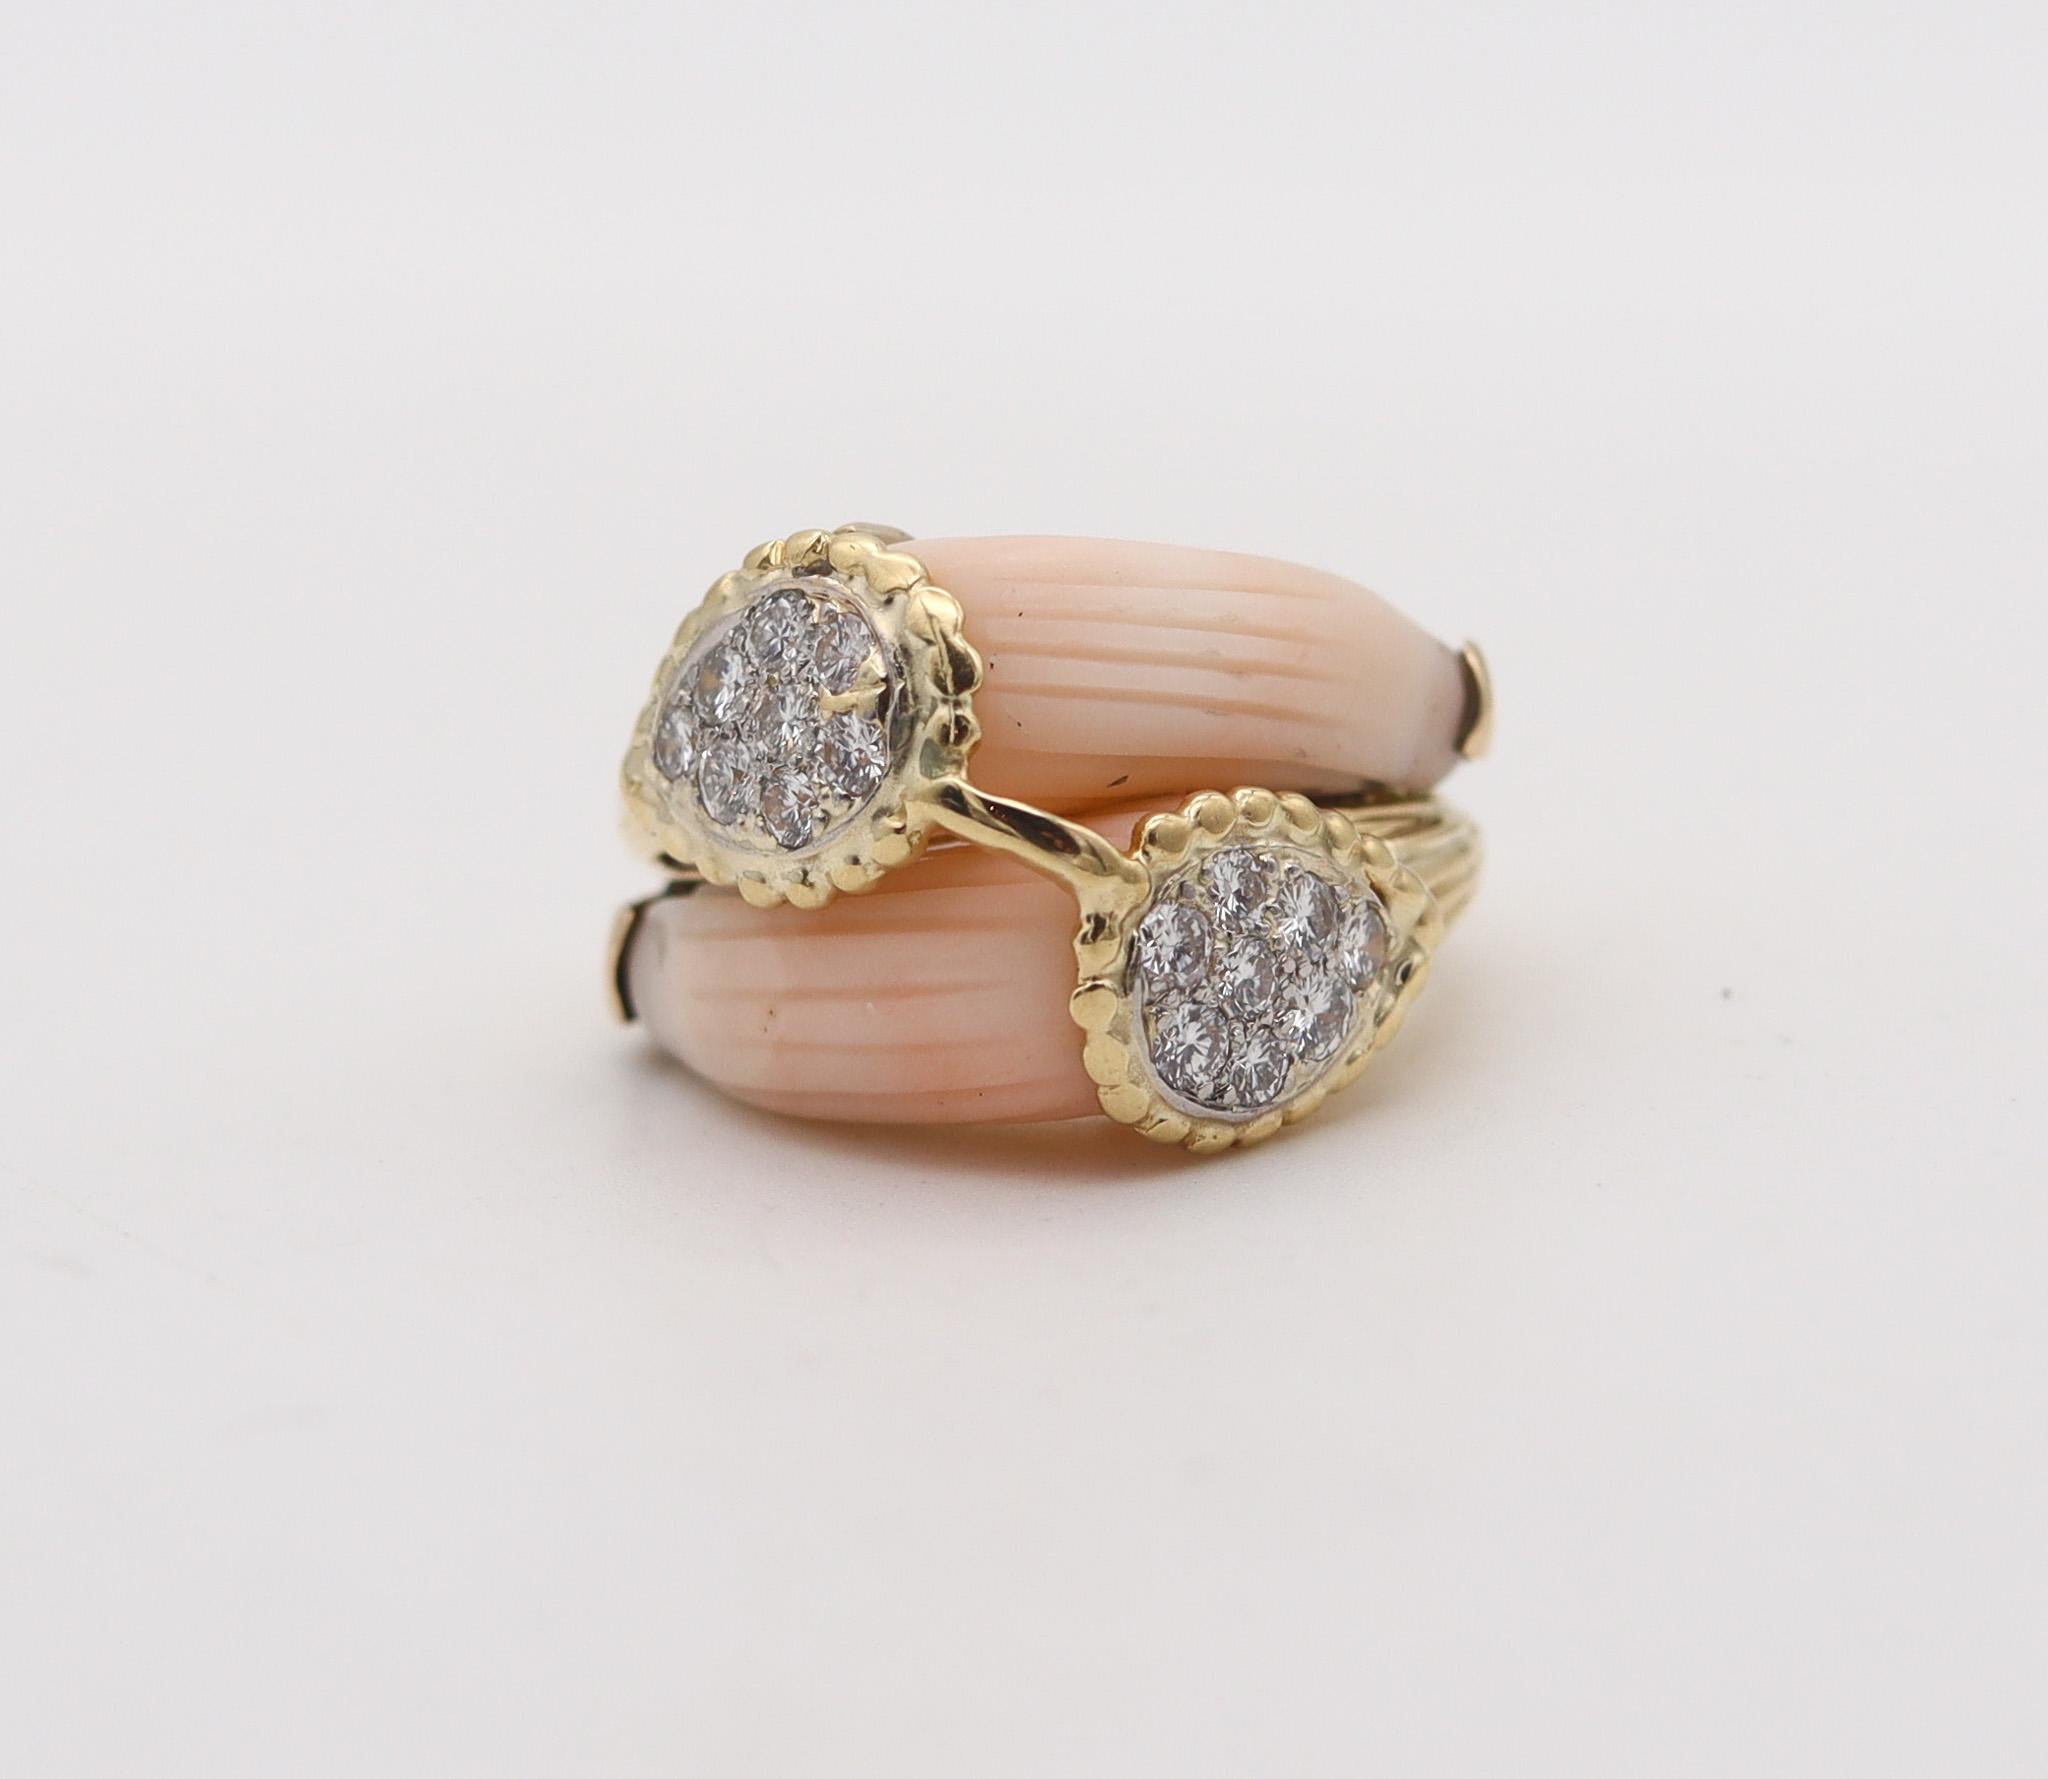 Brilliant Cut Van Cleef & Arpels 1970 Paris Double Corals Ring In 18Kt Gold With VS Diamonds For Sale